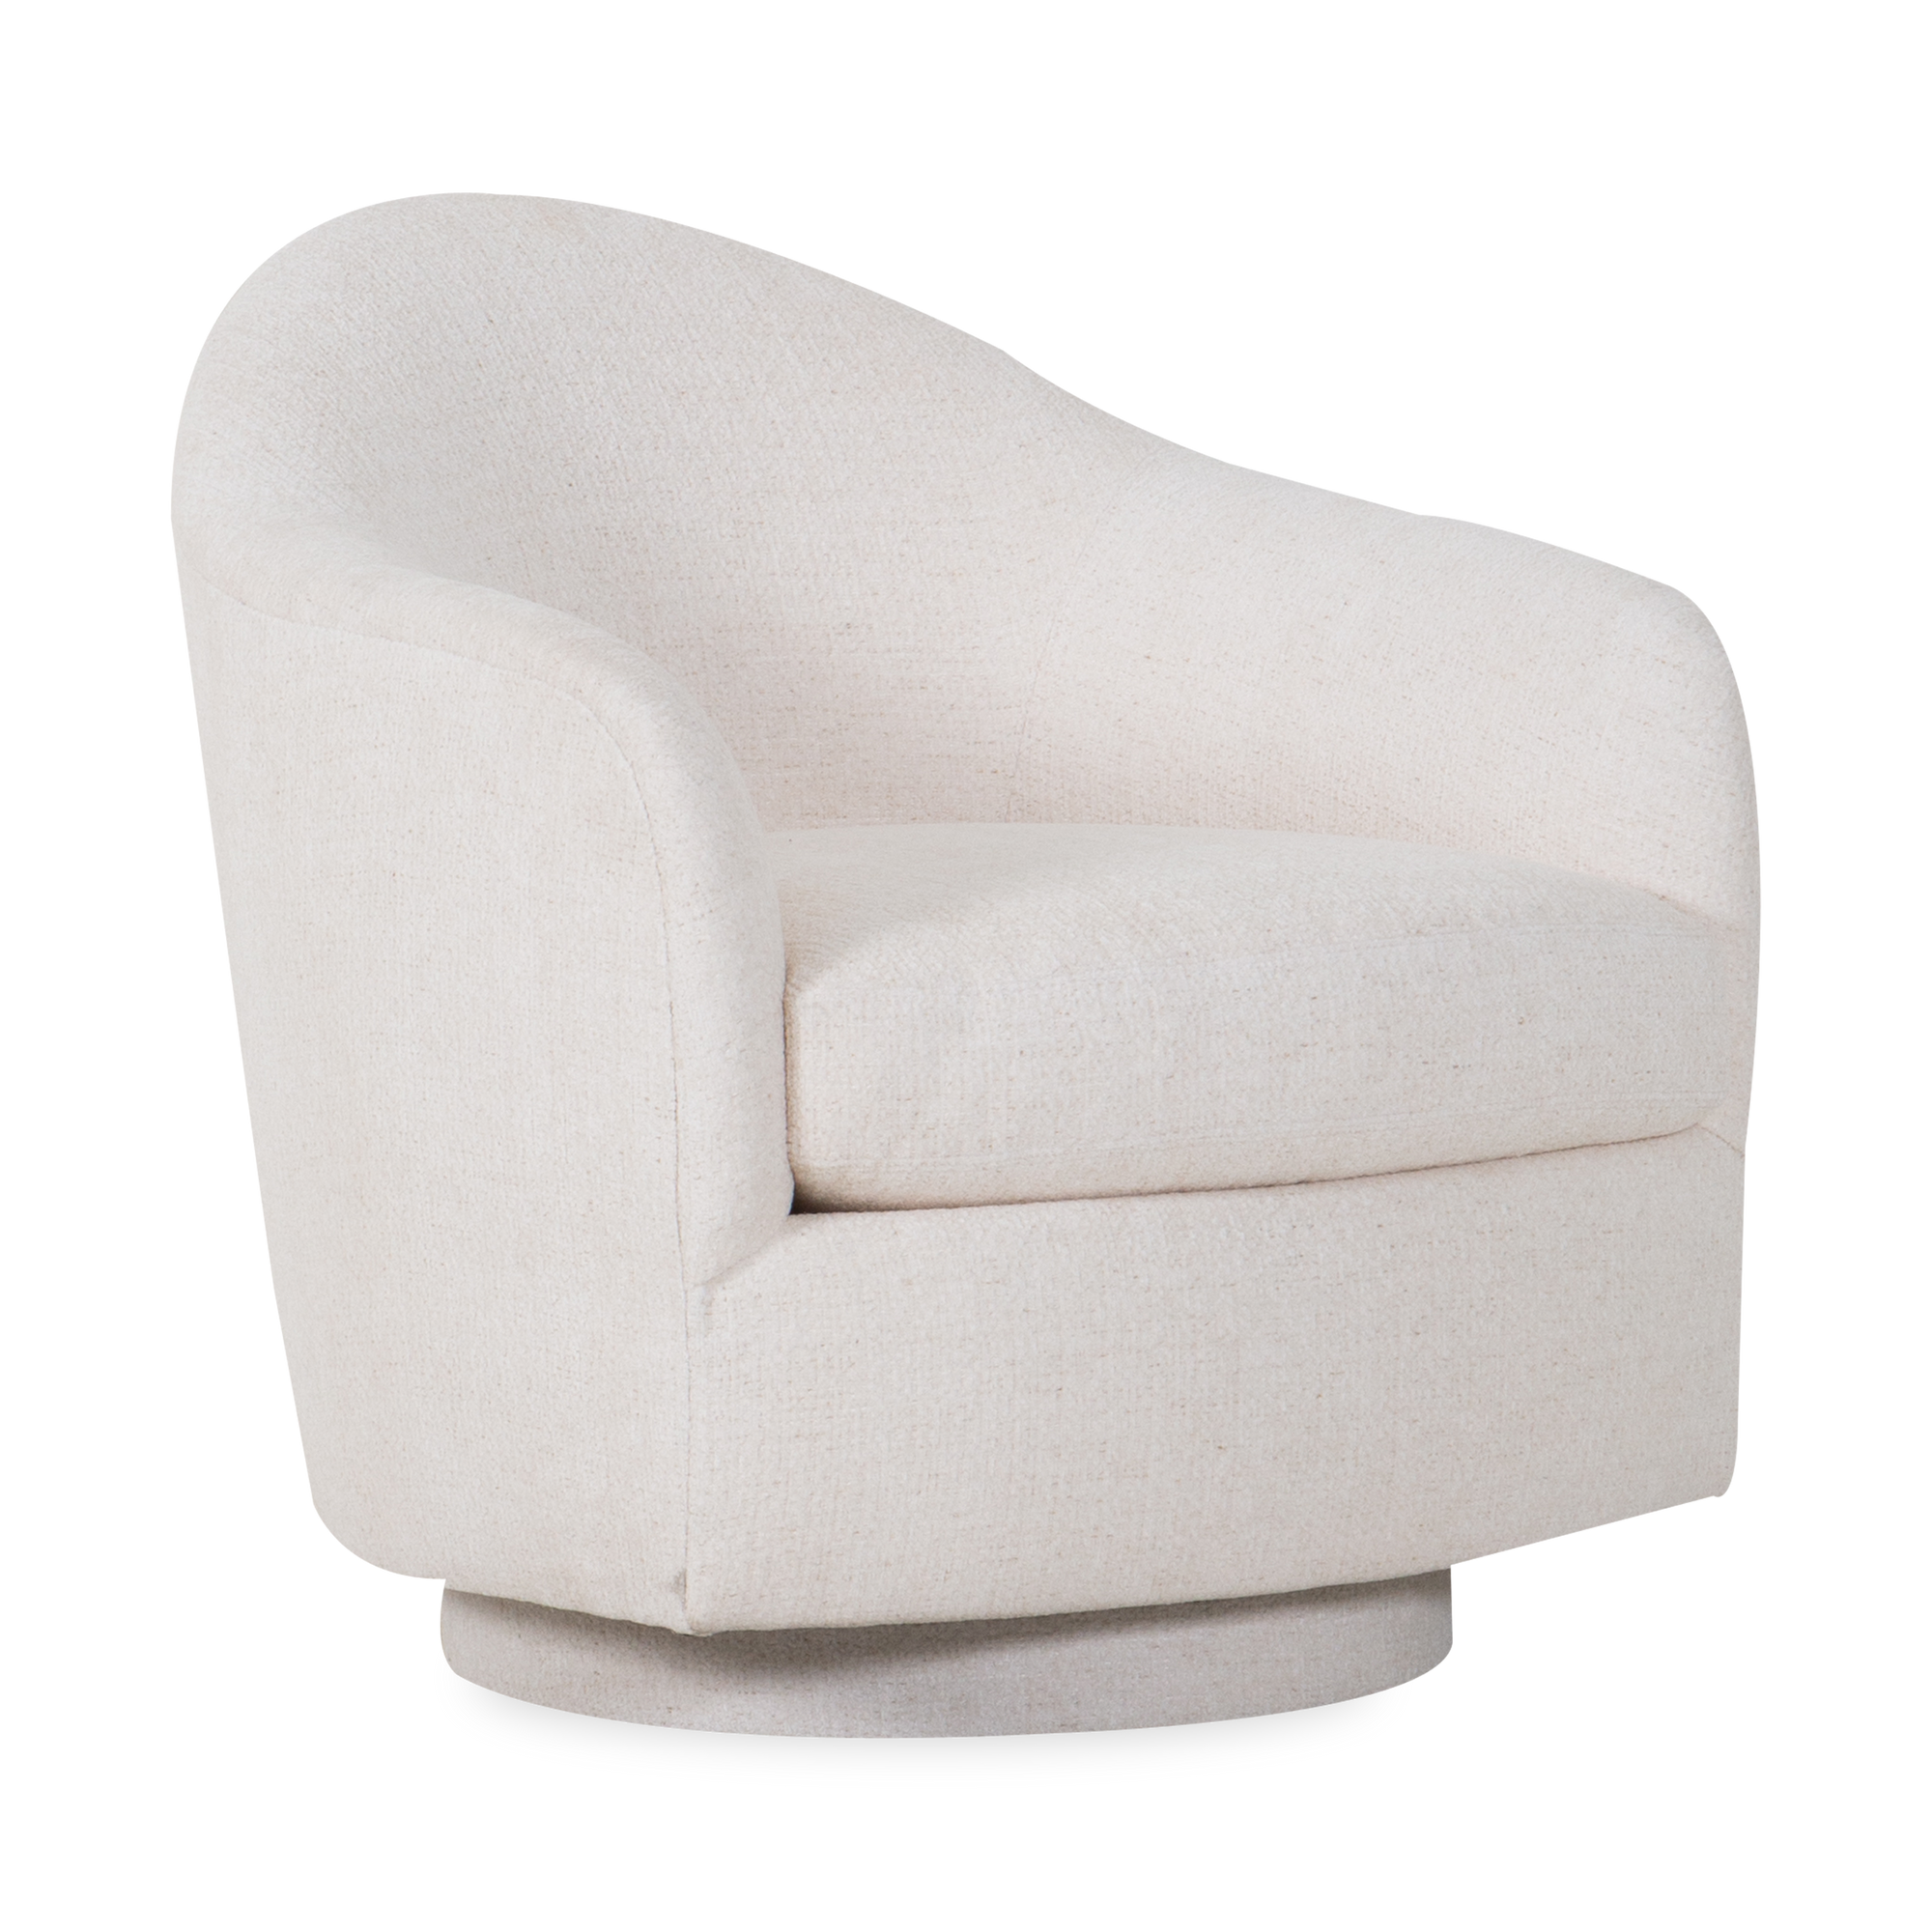 Originally designed in 1973 by Milo Baughman, the Real Good Swivel Tilt Chair is a modern classic.